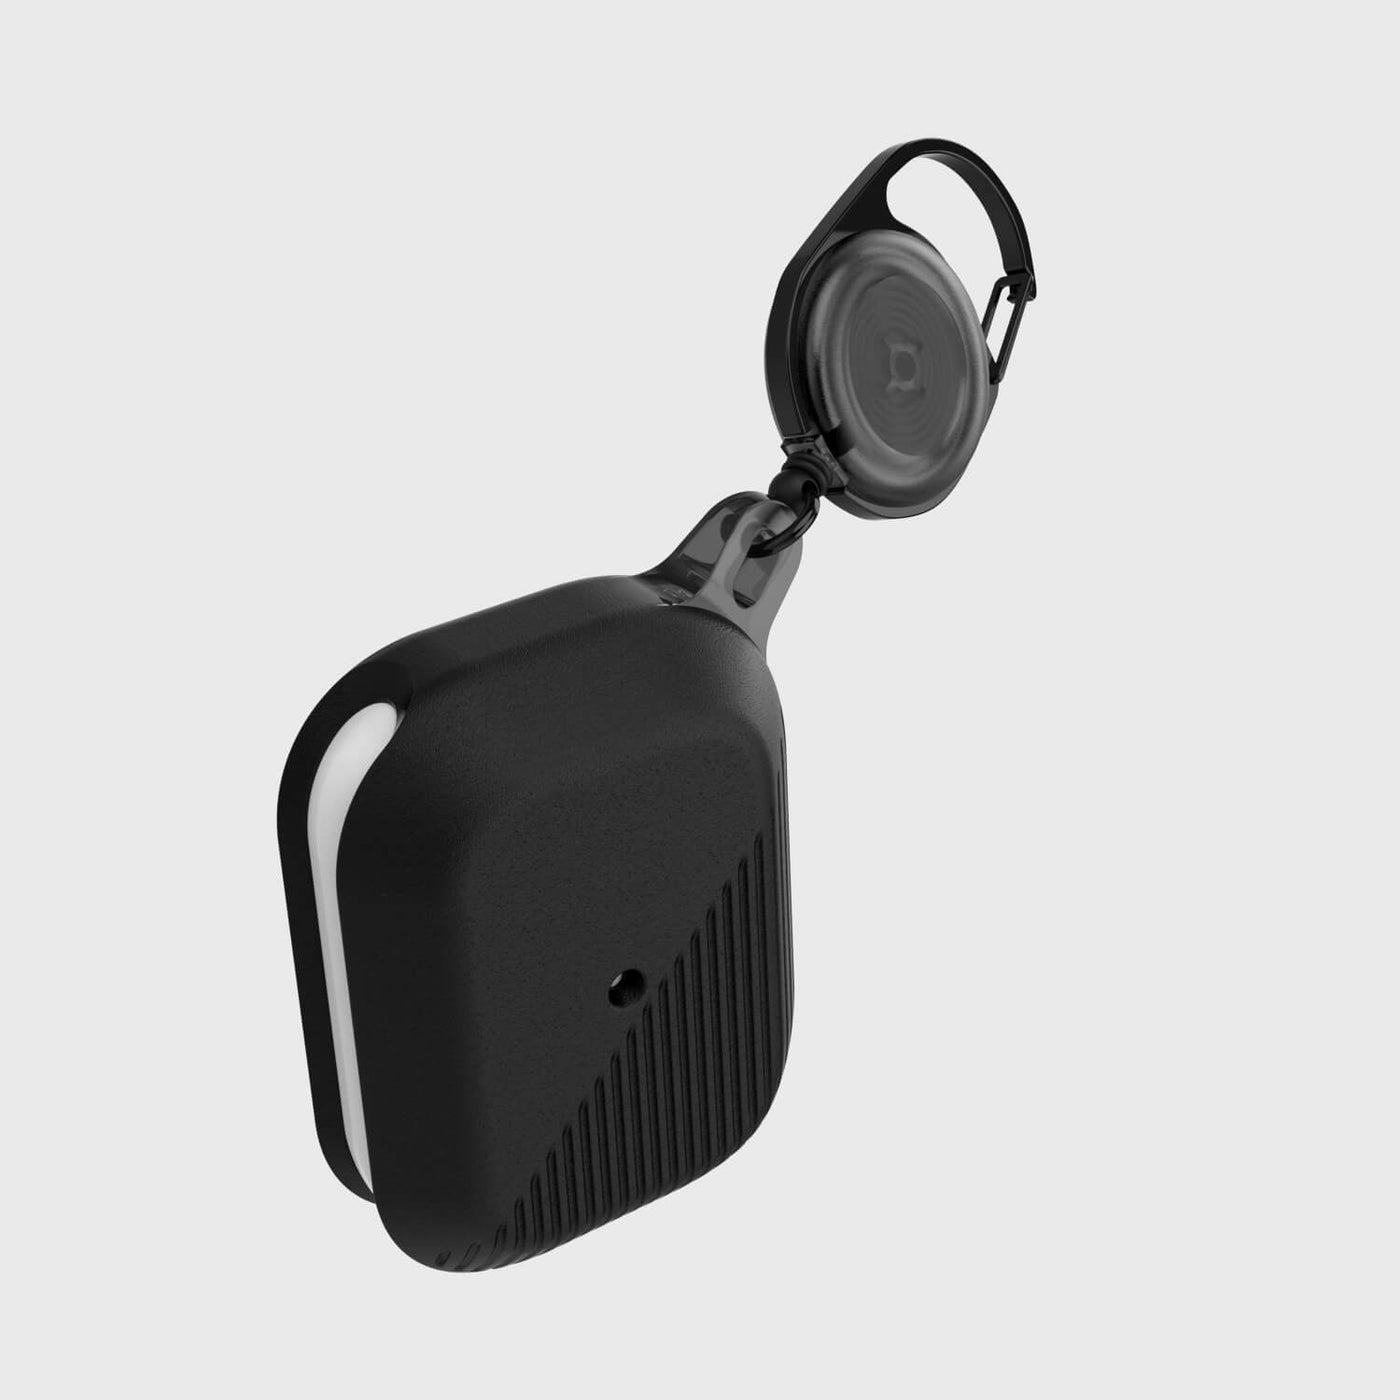 Soft silicone protective case for AirPods Pro with retractable carabiner. Raptic radius in black.